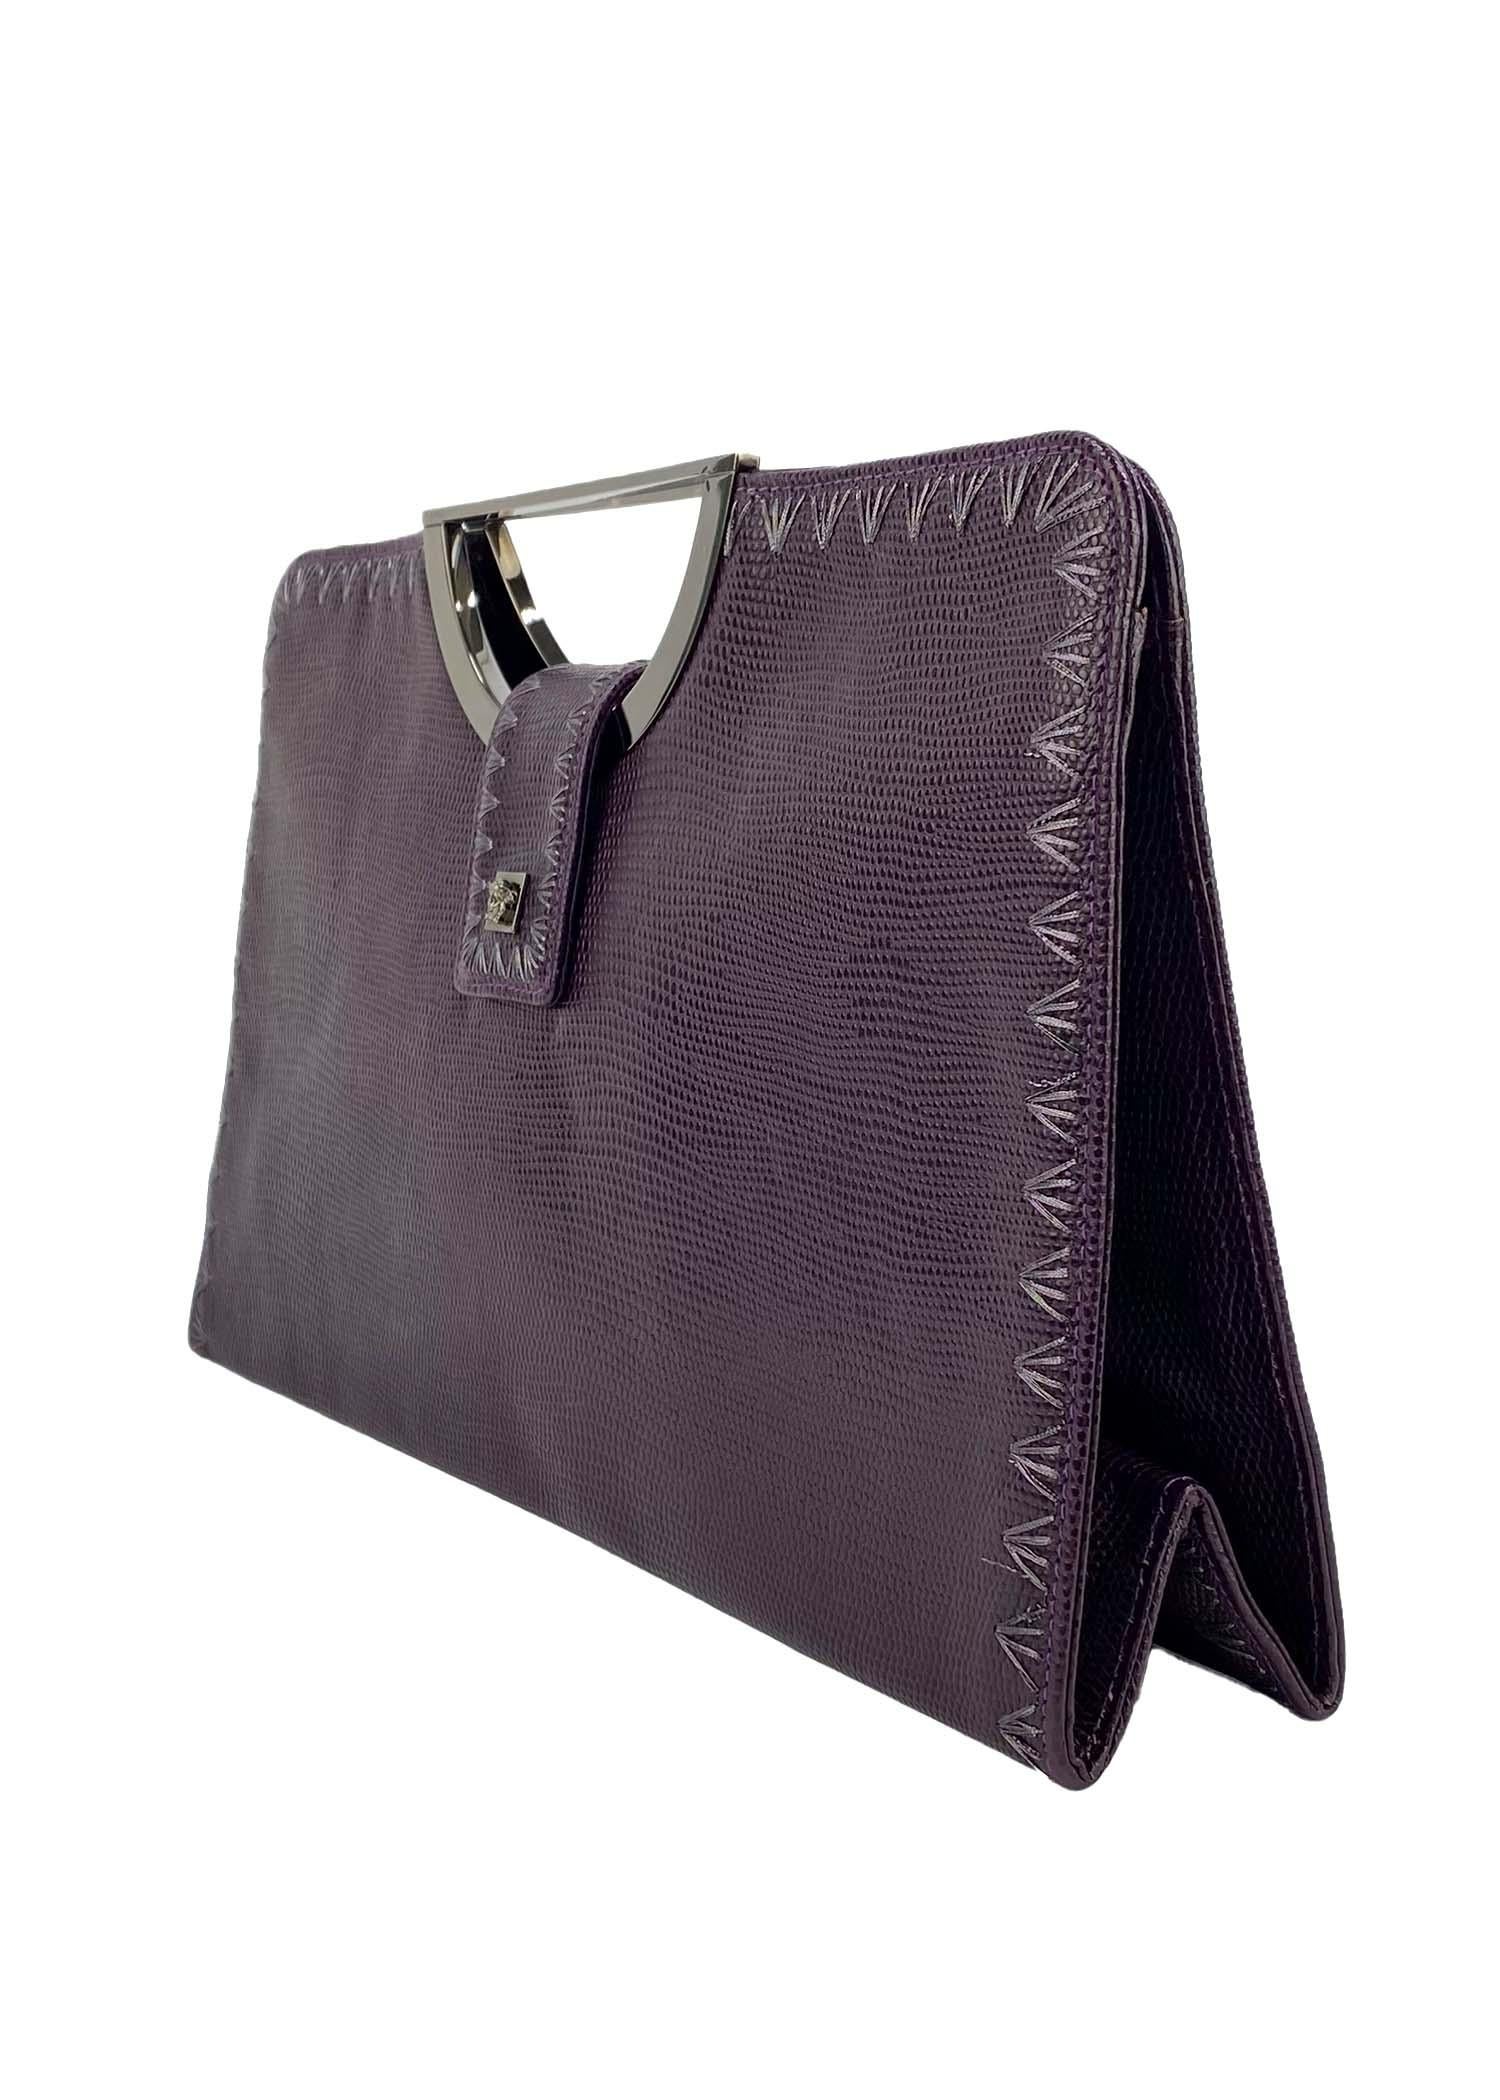 Presenting a purple lizard-embossed Gianni Versace frame bag designed by Donatella Versace in the early 2000s. This Y2K bag features a gunmetal Medusa medallion on the magnetic closure strap and embroidery along the edges. Seek and expertly crafted,